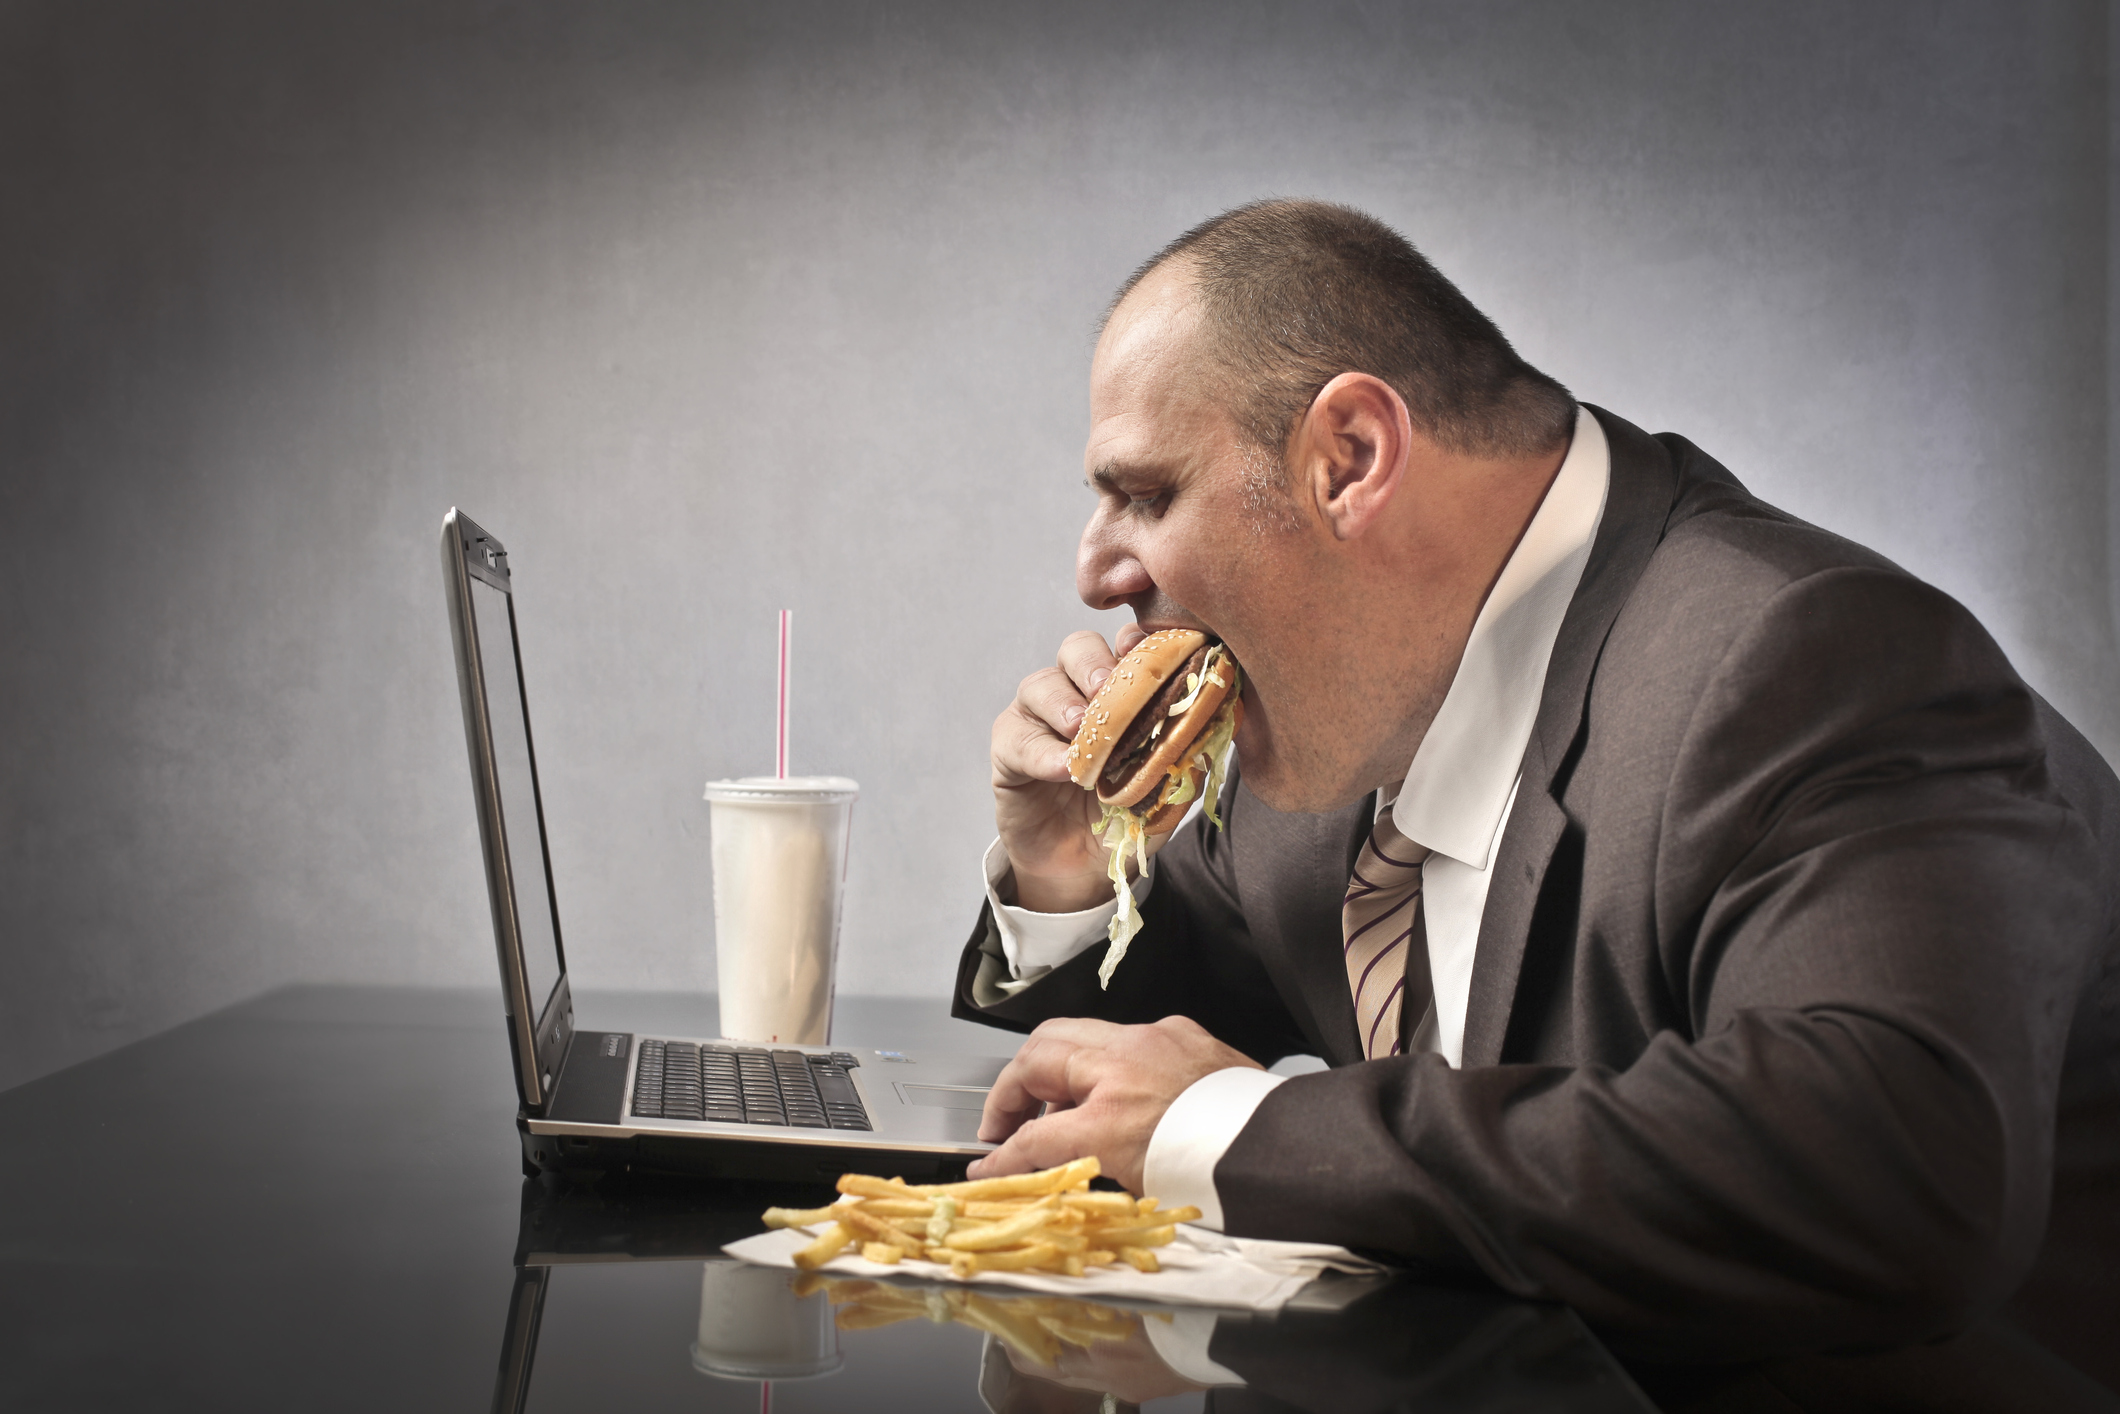 Fat businessman eating junk food in front of a laptop